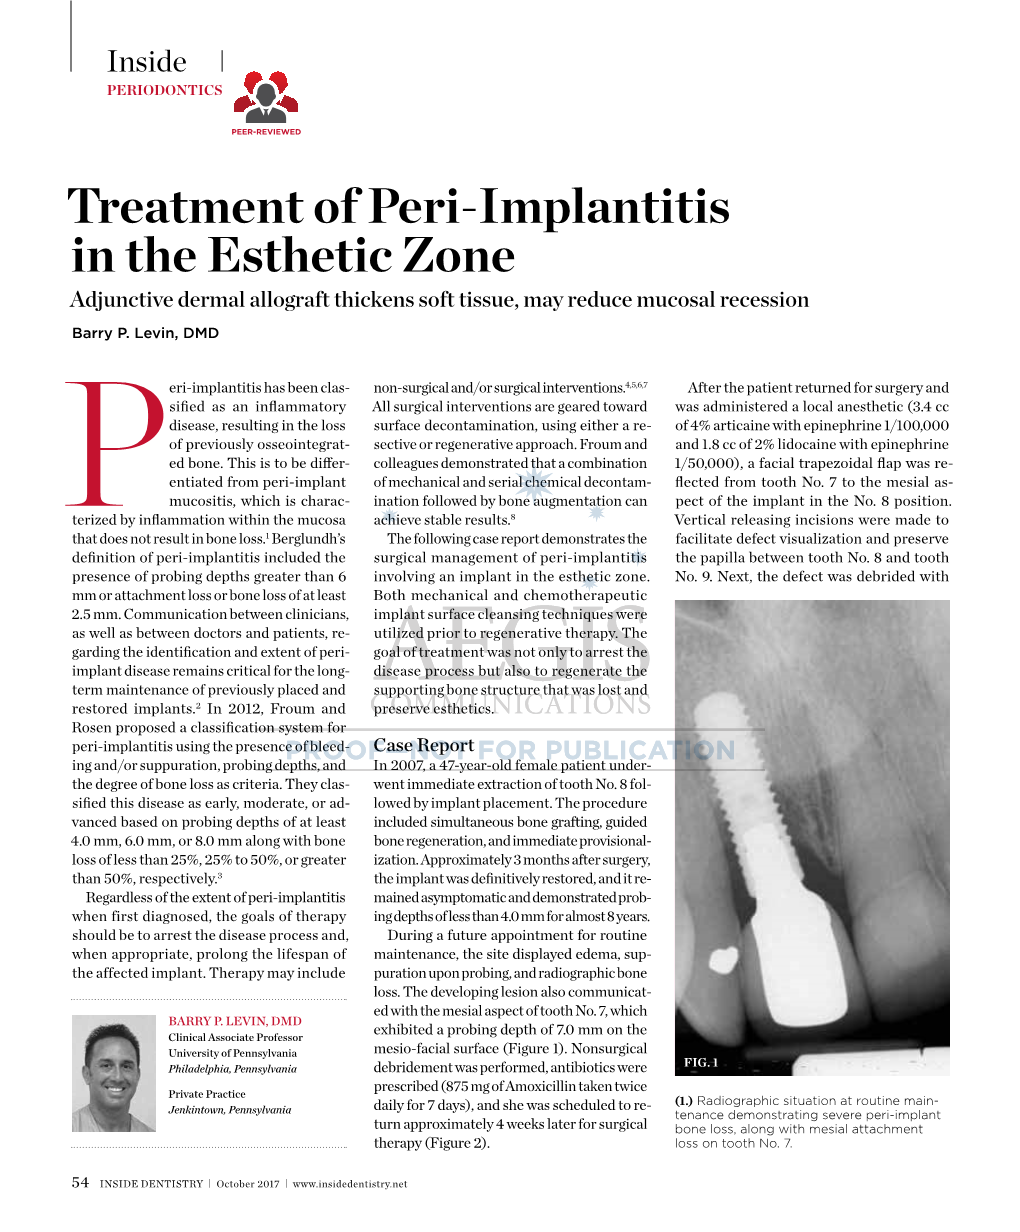 Treatment of Peri-Implantitis in the Esthetic Zone Adjunctive Dermal Allograft Thickens Soft Tissue, May Reduce Mucosal Recession